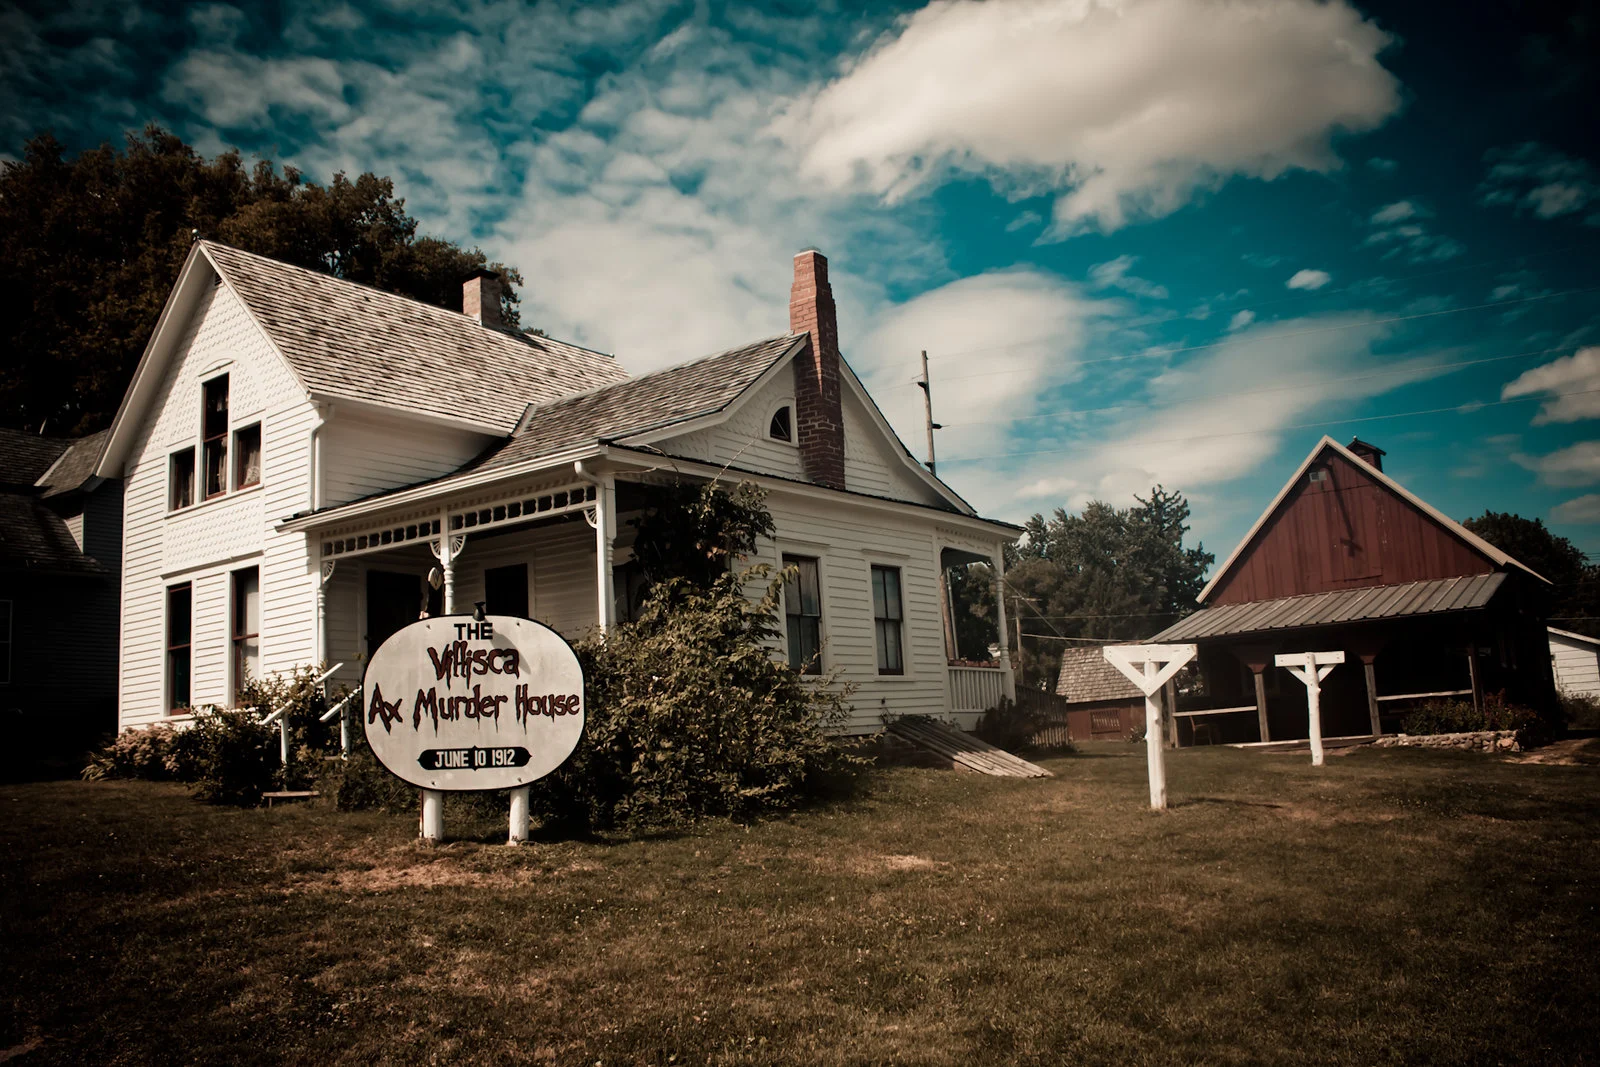 A spooky photo on Villisca Axe Murder House, a piece on what to see in Iowa, where an unsolved murder mystery took place